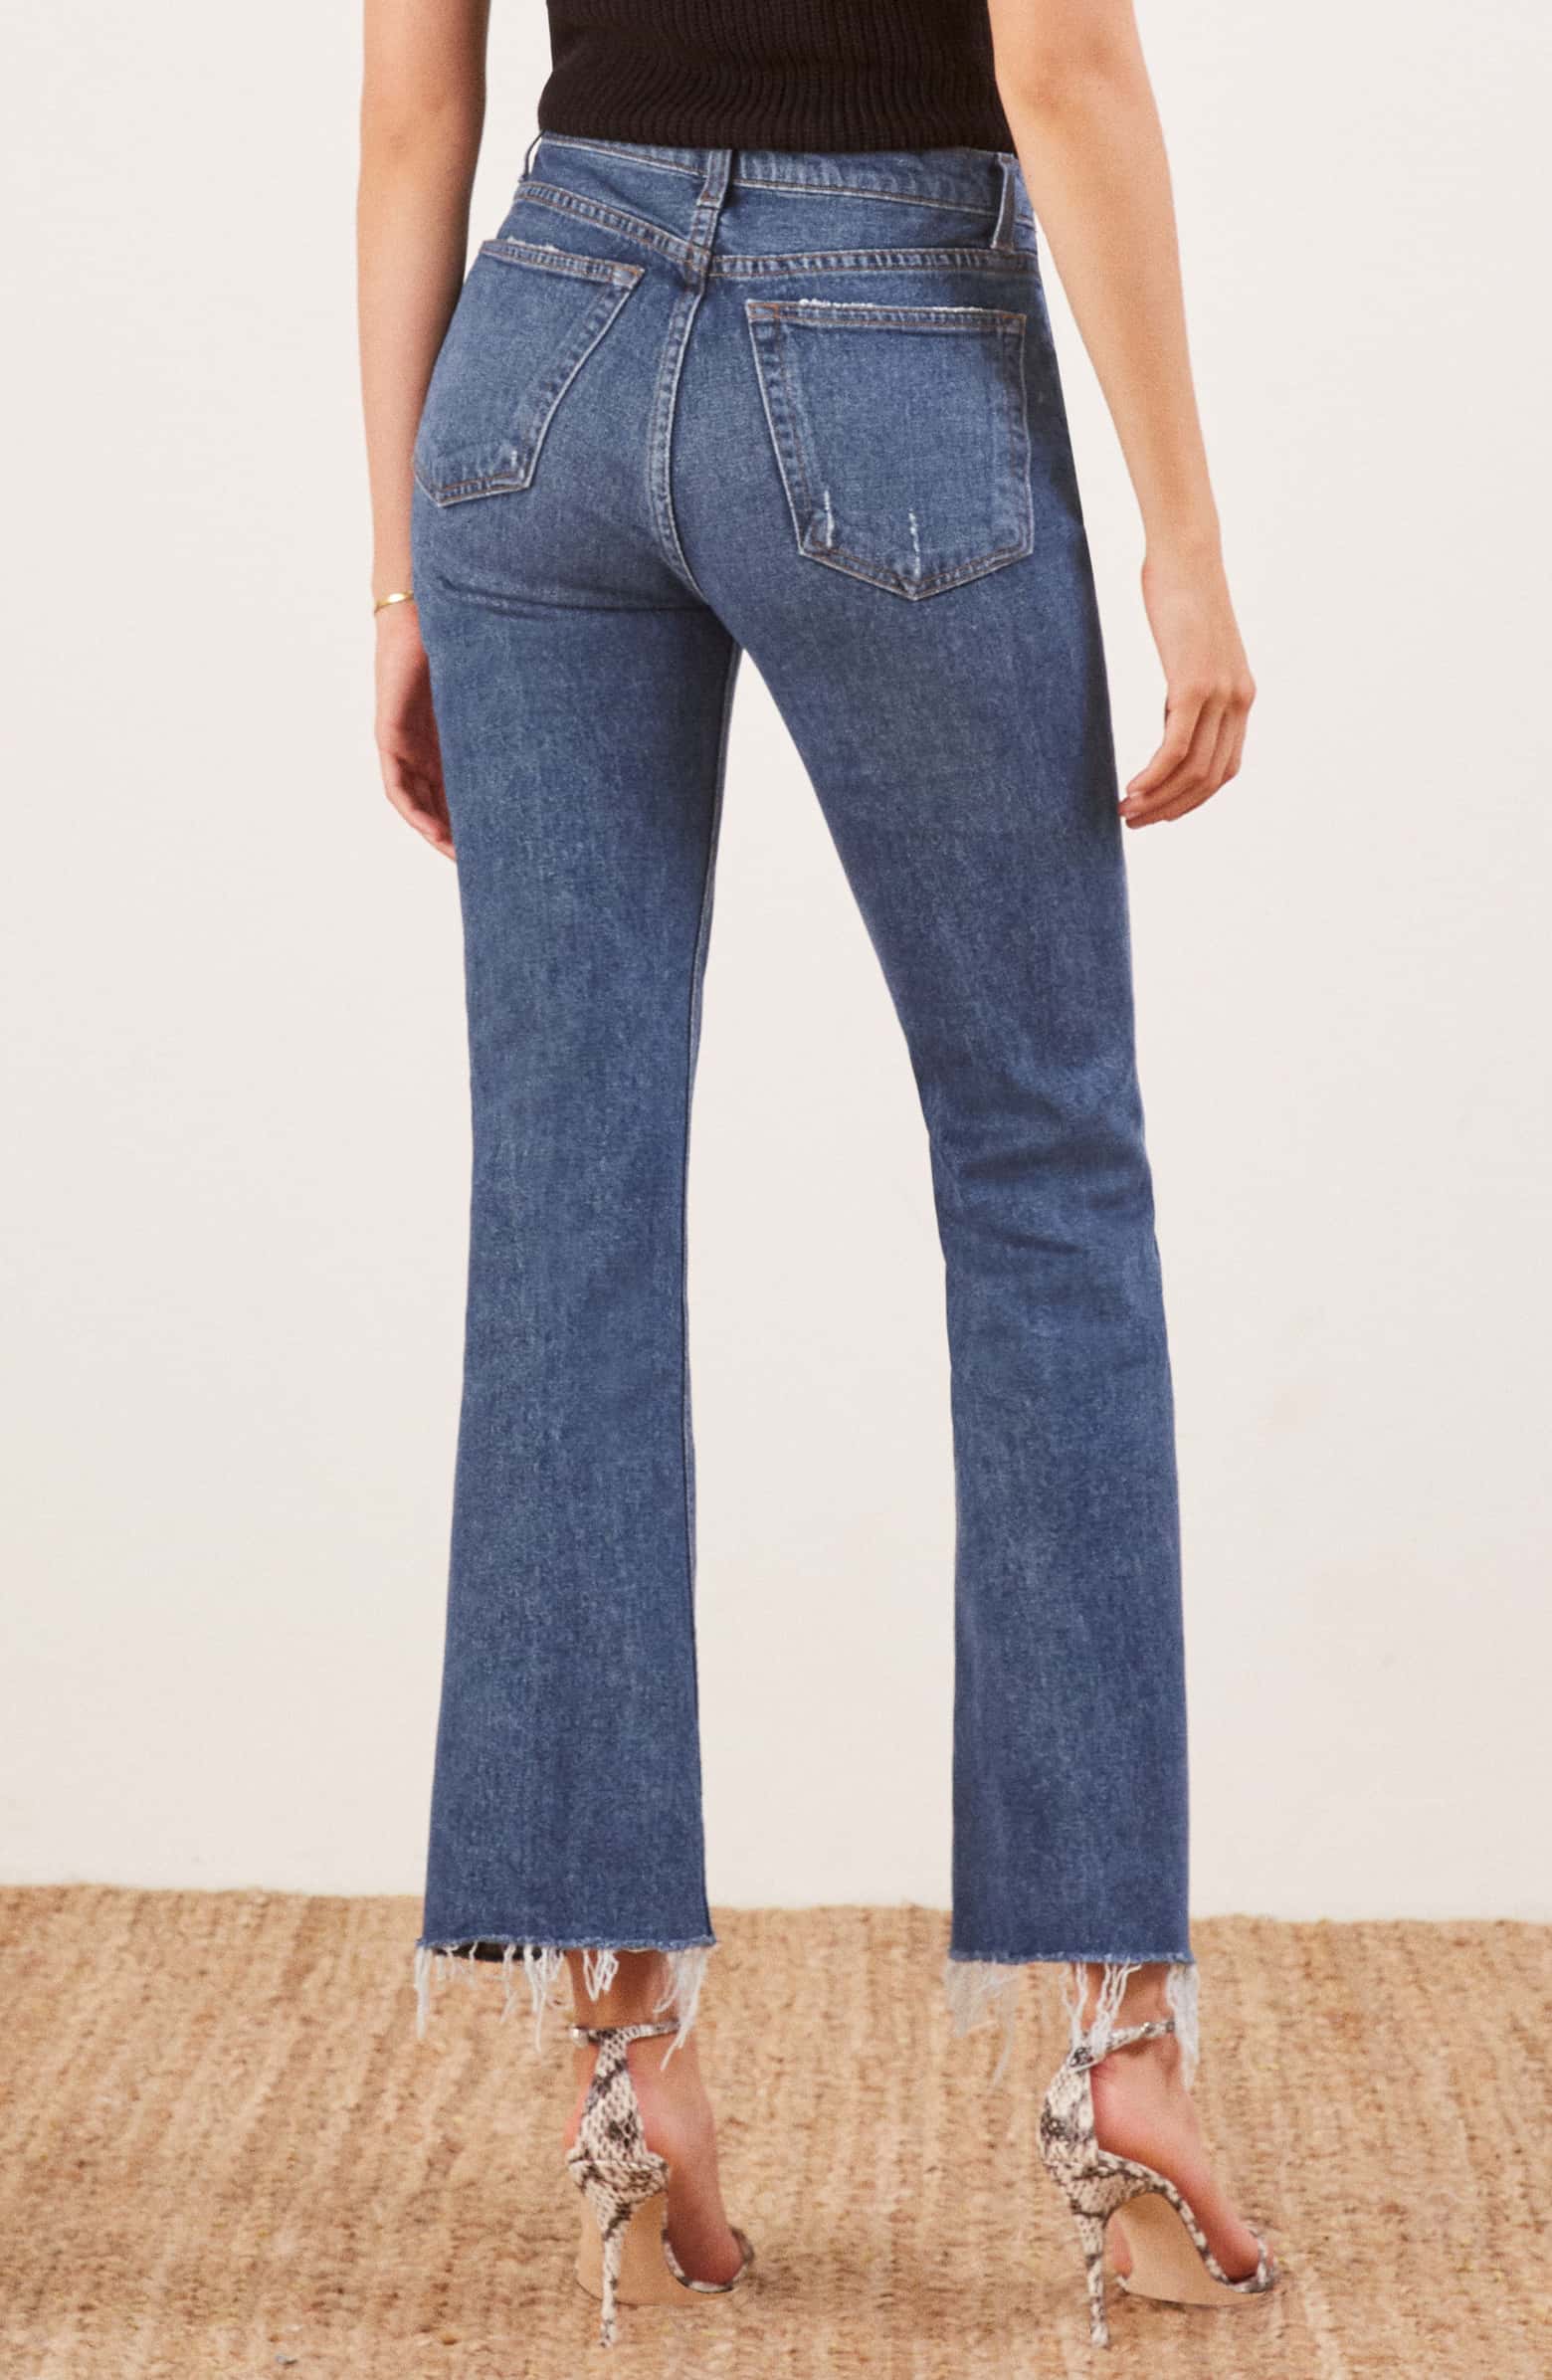 6 Ethical Denim Brands to Fall in Love With — The Honest Consumer